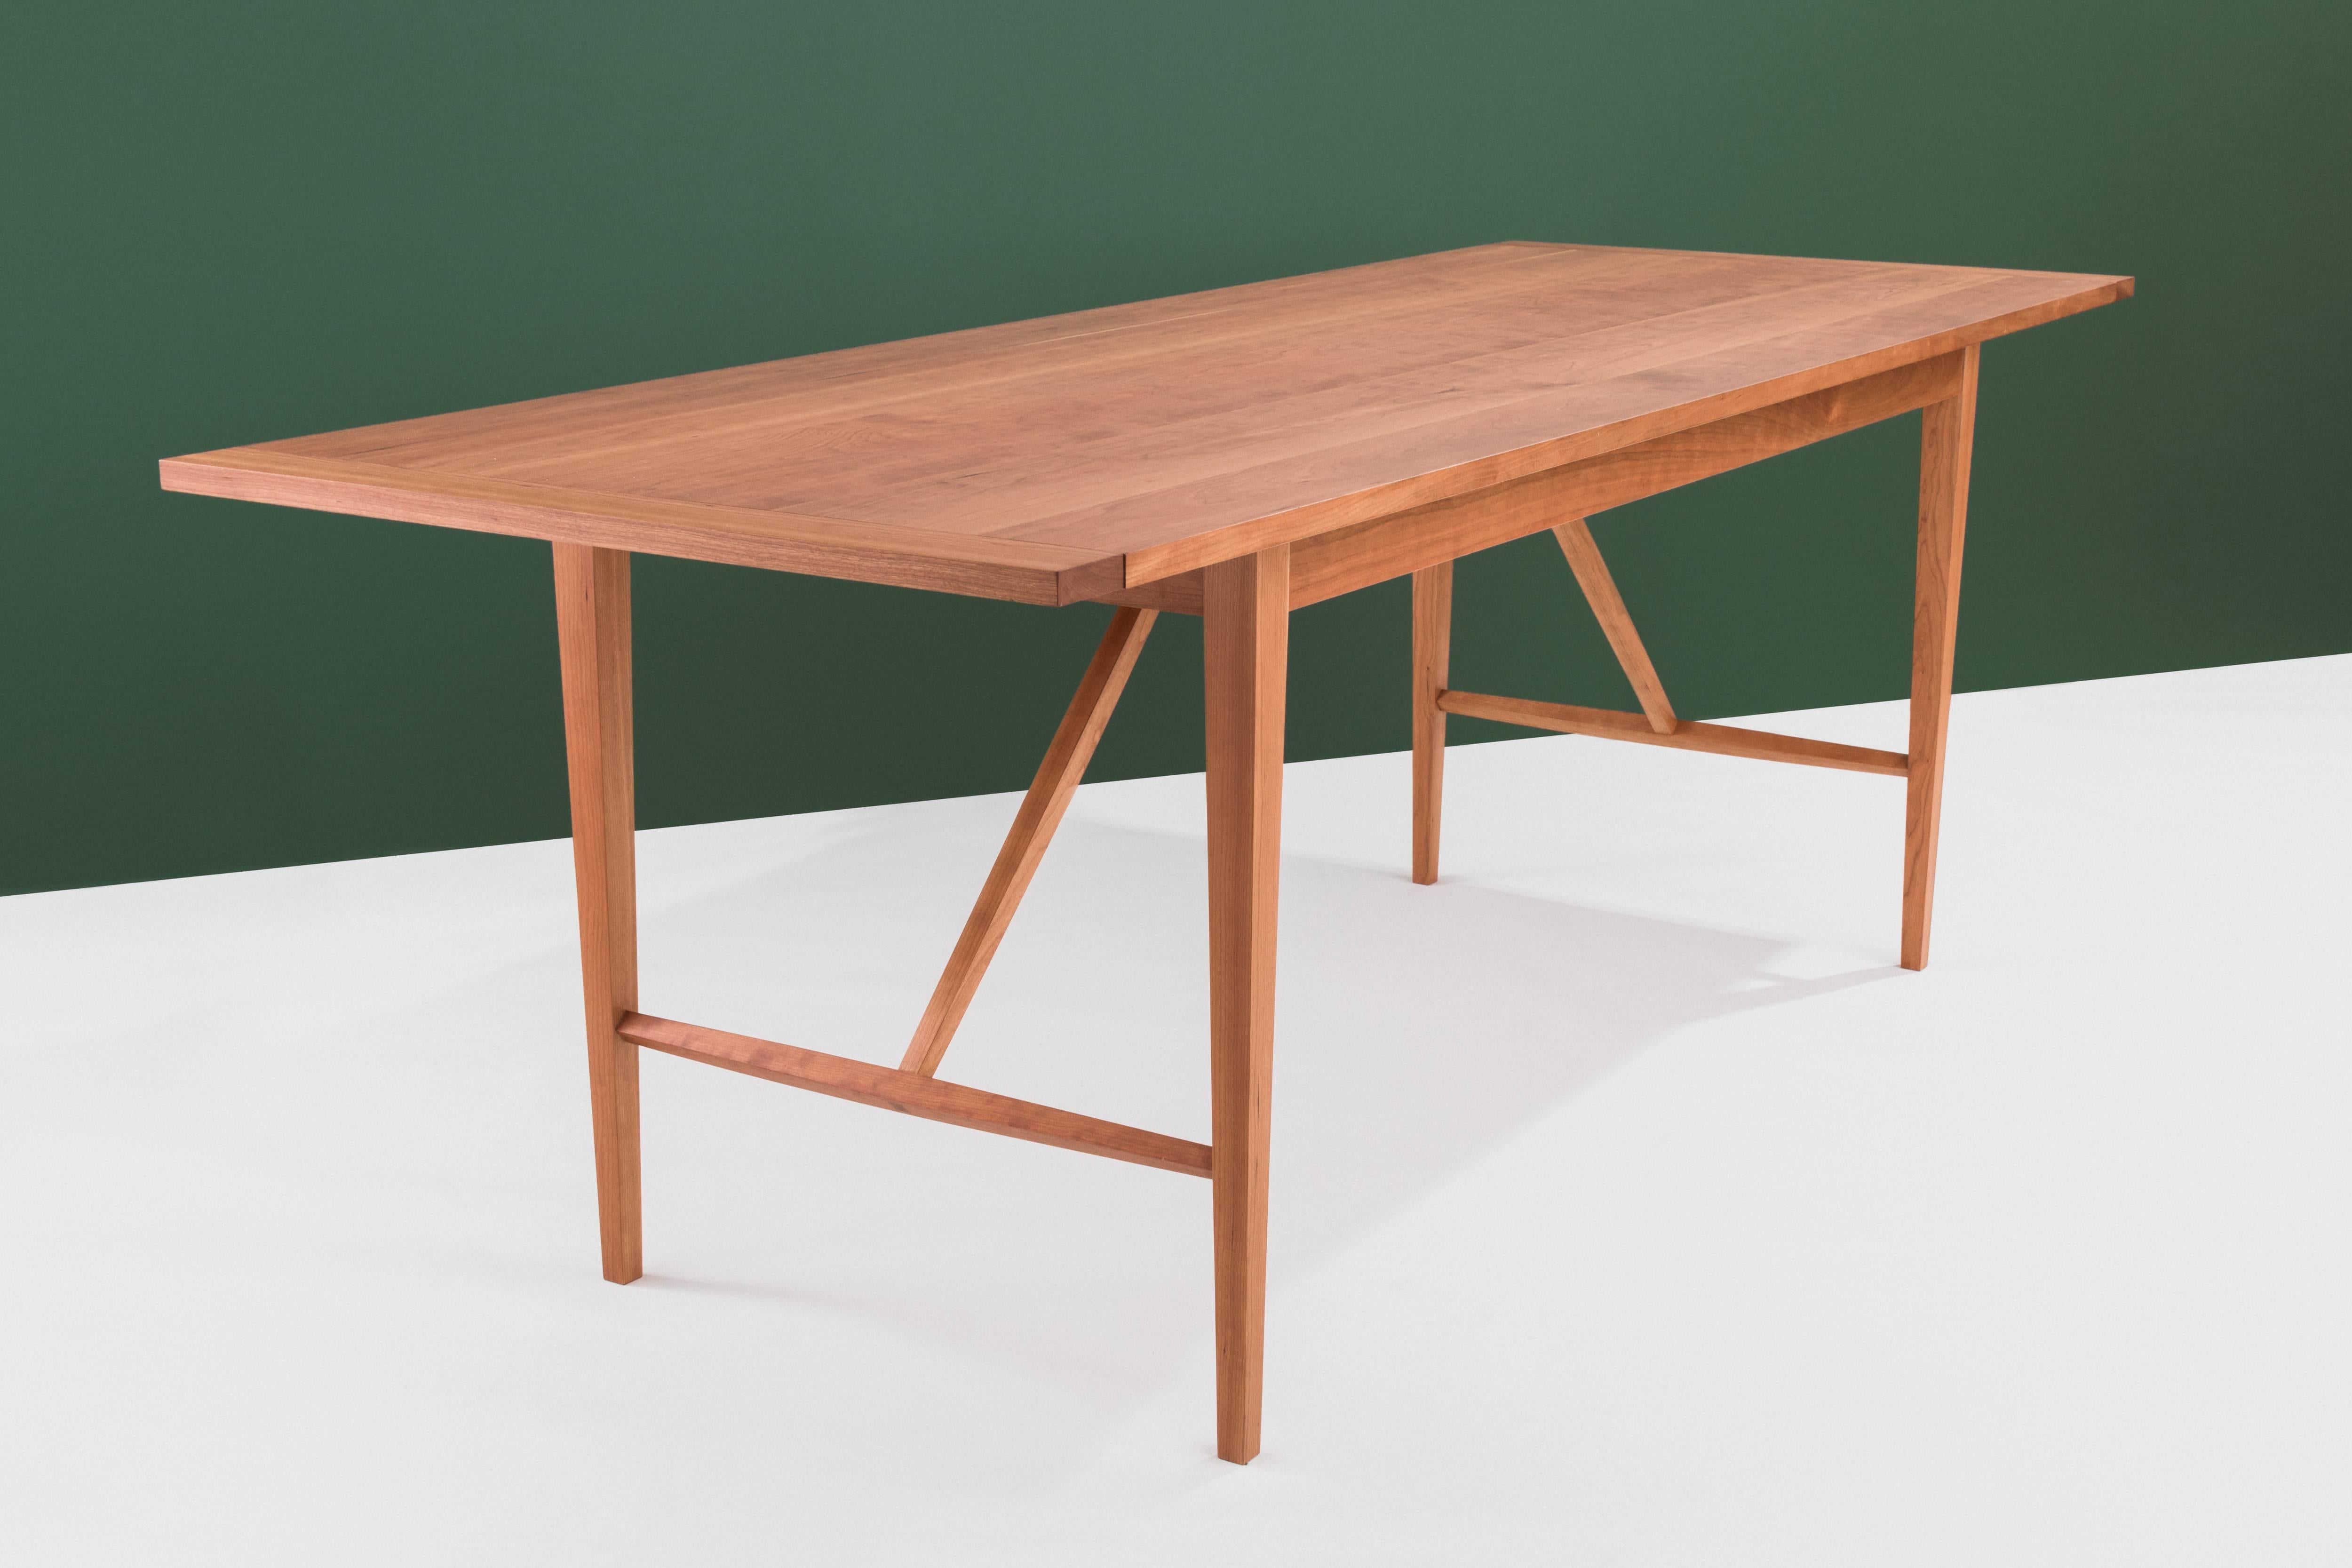 American Hill Dining Table by Tretiak Works, Handcrafted Solid Cherry Shaker For Sale